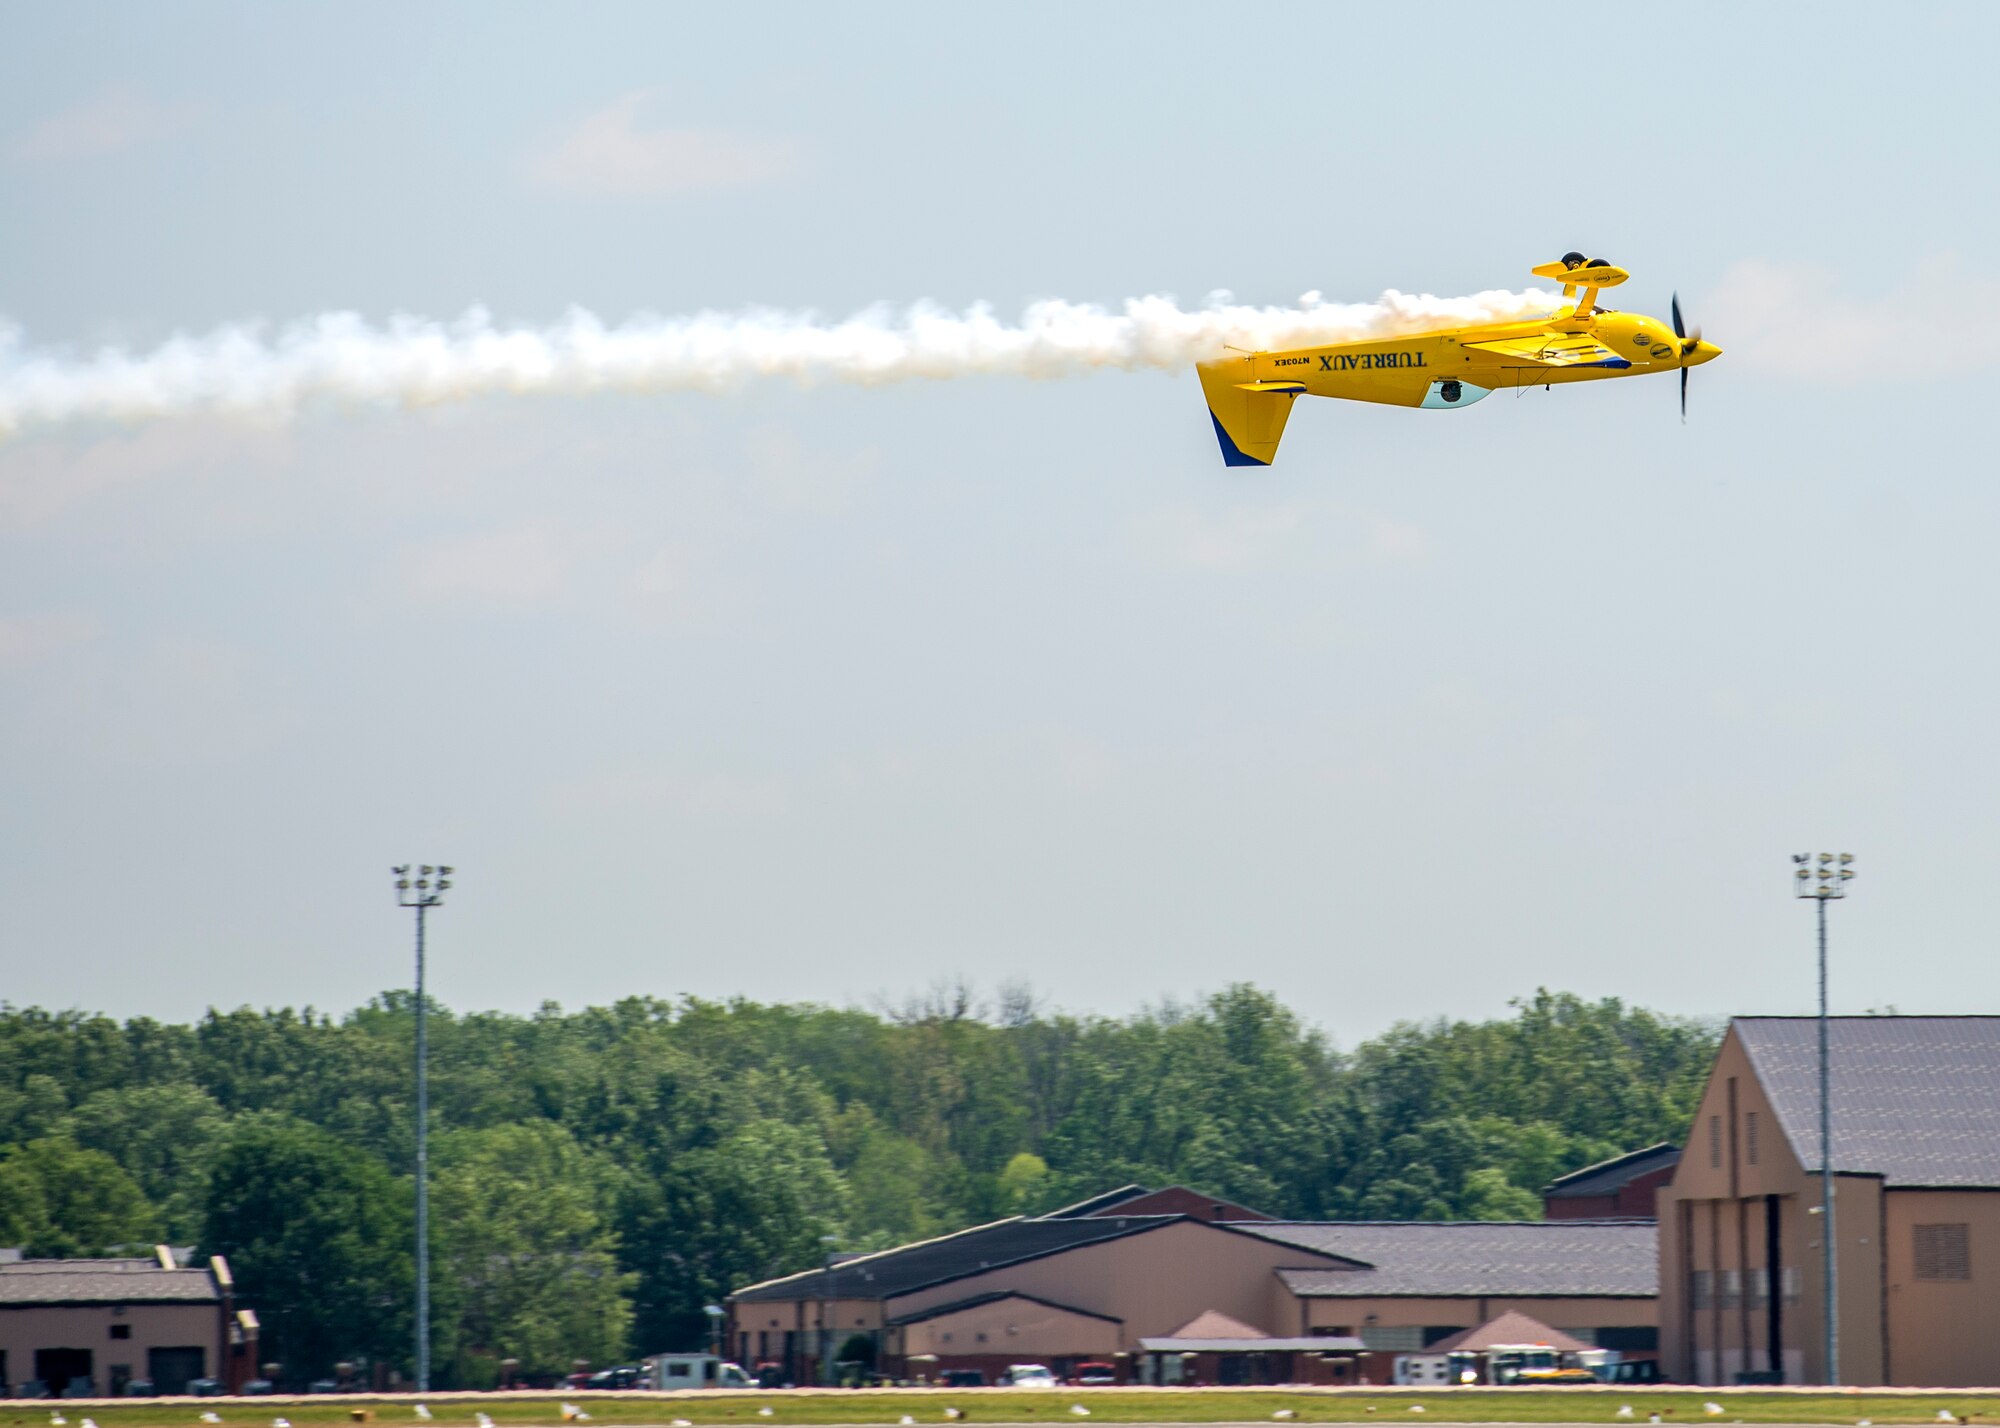 Kevin Coleman performs during the 100th Centennial Celebration Air Show, June 11, 2017, at Scott Air Force Base, Ill. Kevin began performing in air shows at the age of 18, one of the youngest professional performers in the air show circuit. He started flying lessons and aerobatics at the tender age of 10 with late American aviation legend and Aerobatic Hall of Fame member, Marion Cole. Kevin soloed on his 16th birthday and followed his Private Pilot’s License with a Commercial License two years later. He launched his full-time aviation career after graduating from Louisiana Tech University with an Aviation Management degree at the age of 22. (Air Force photo by Airman 1st Class Daniel Garcia)